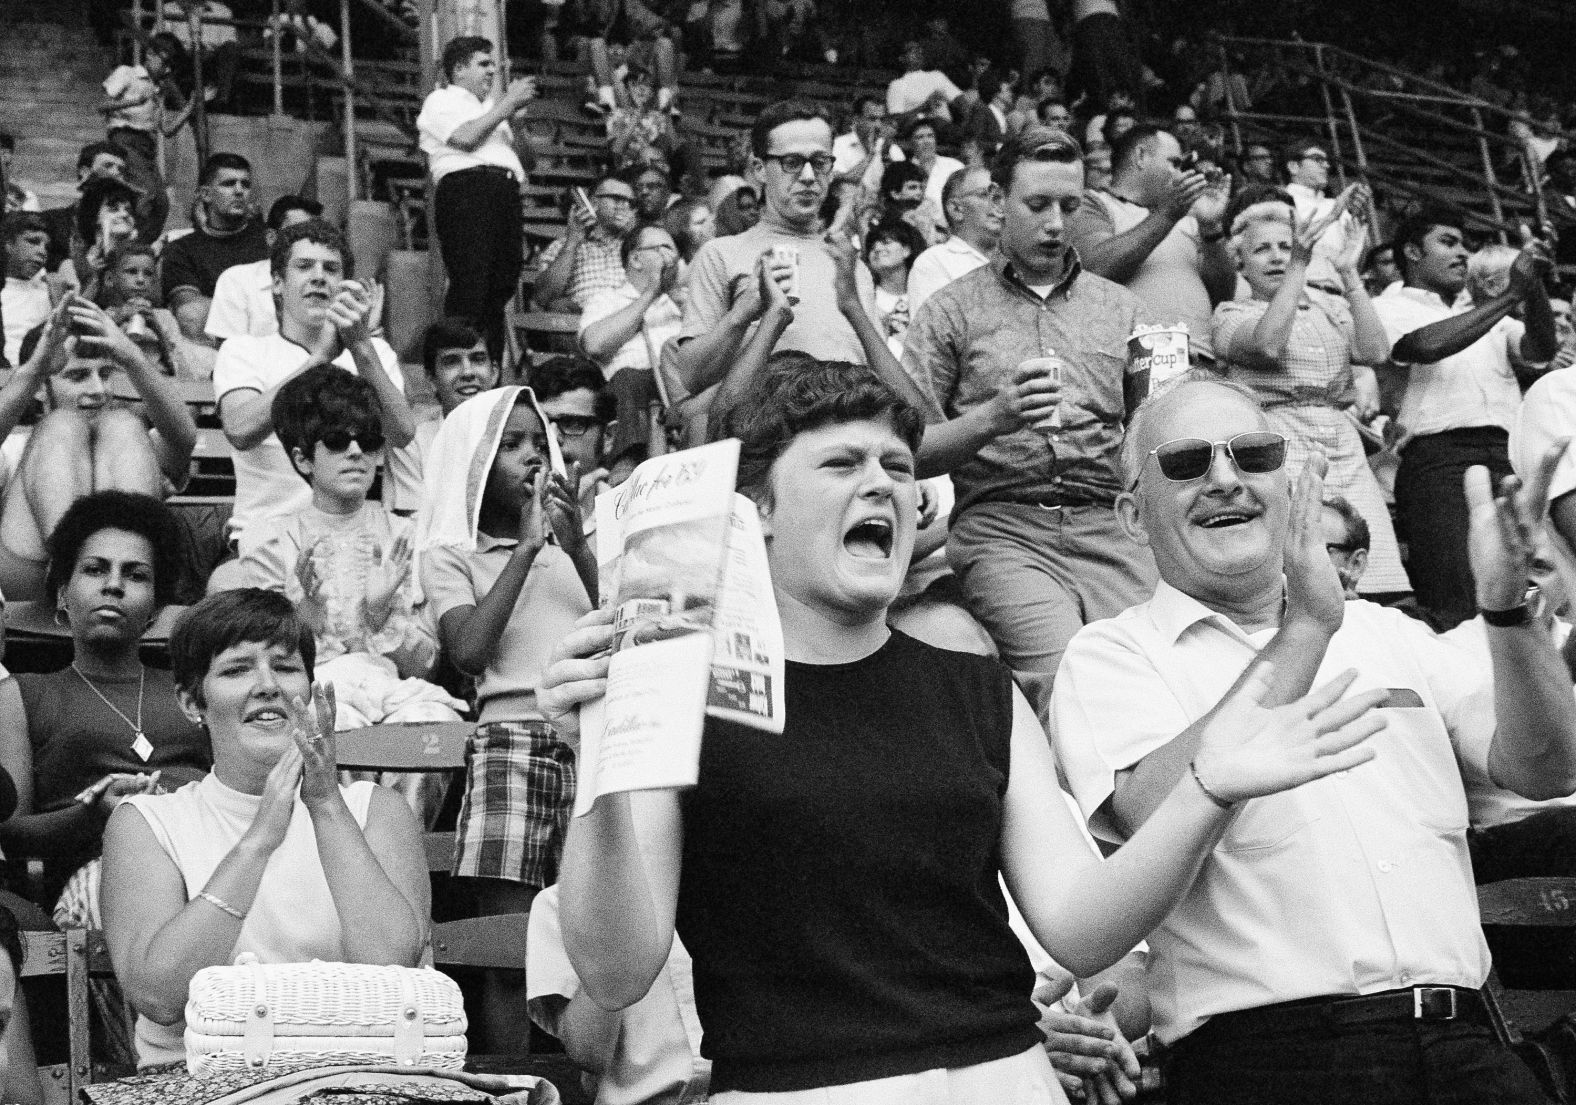 Fans attending a Philadelphia Phillies baseball game cheer after it was announced that the Eagle had made a safe lunar landing on July 20, 1969.